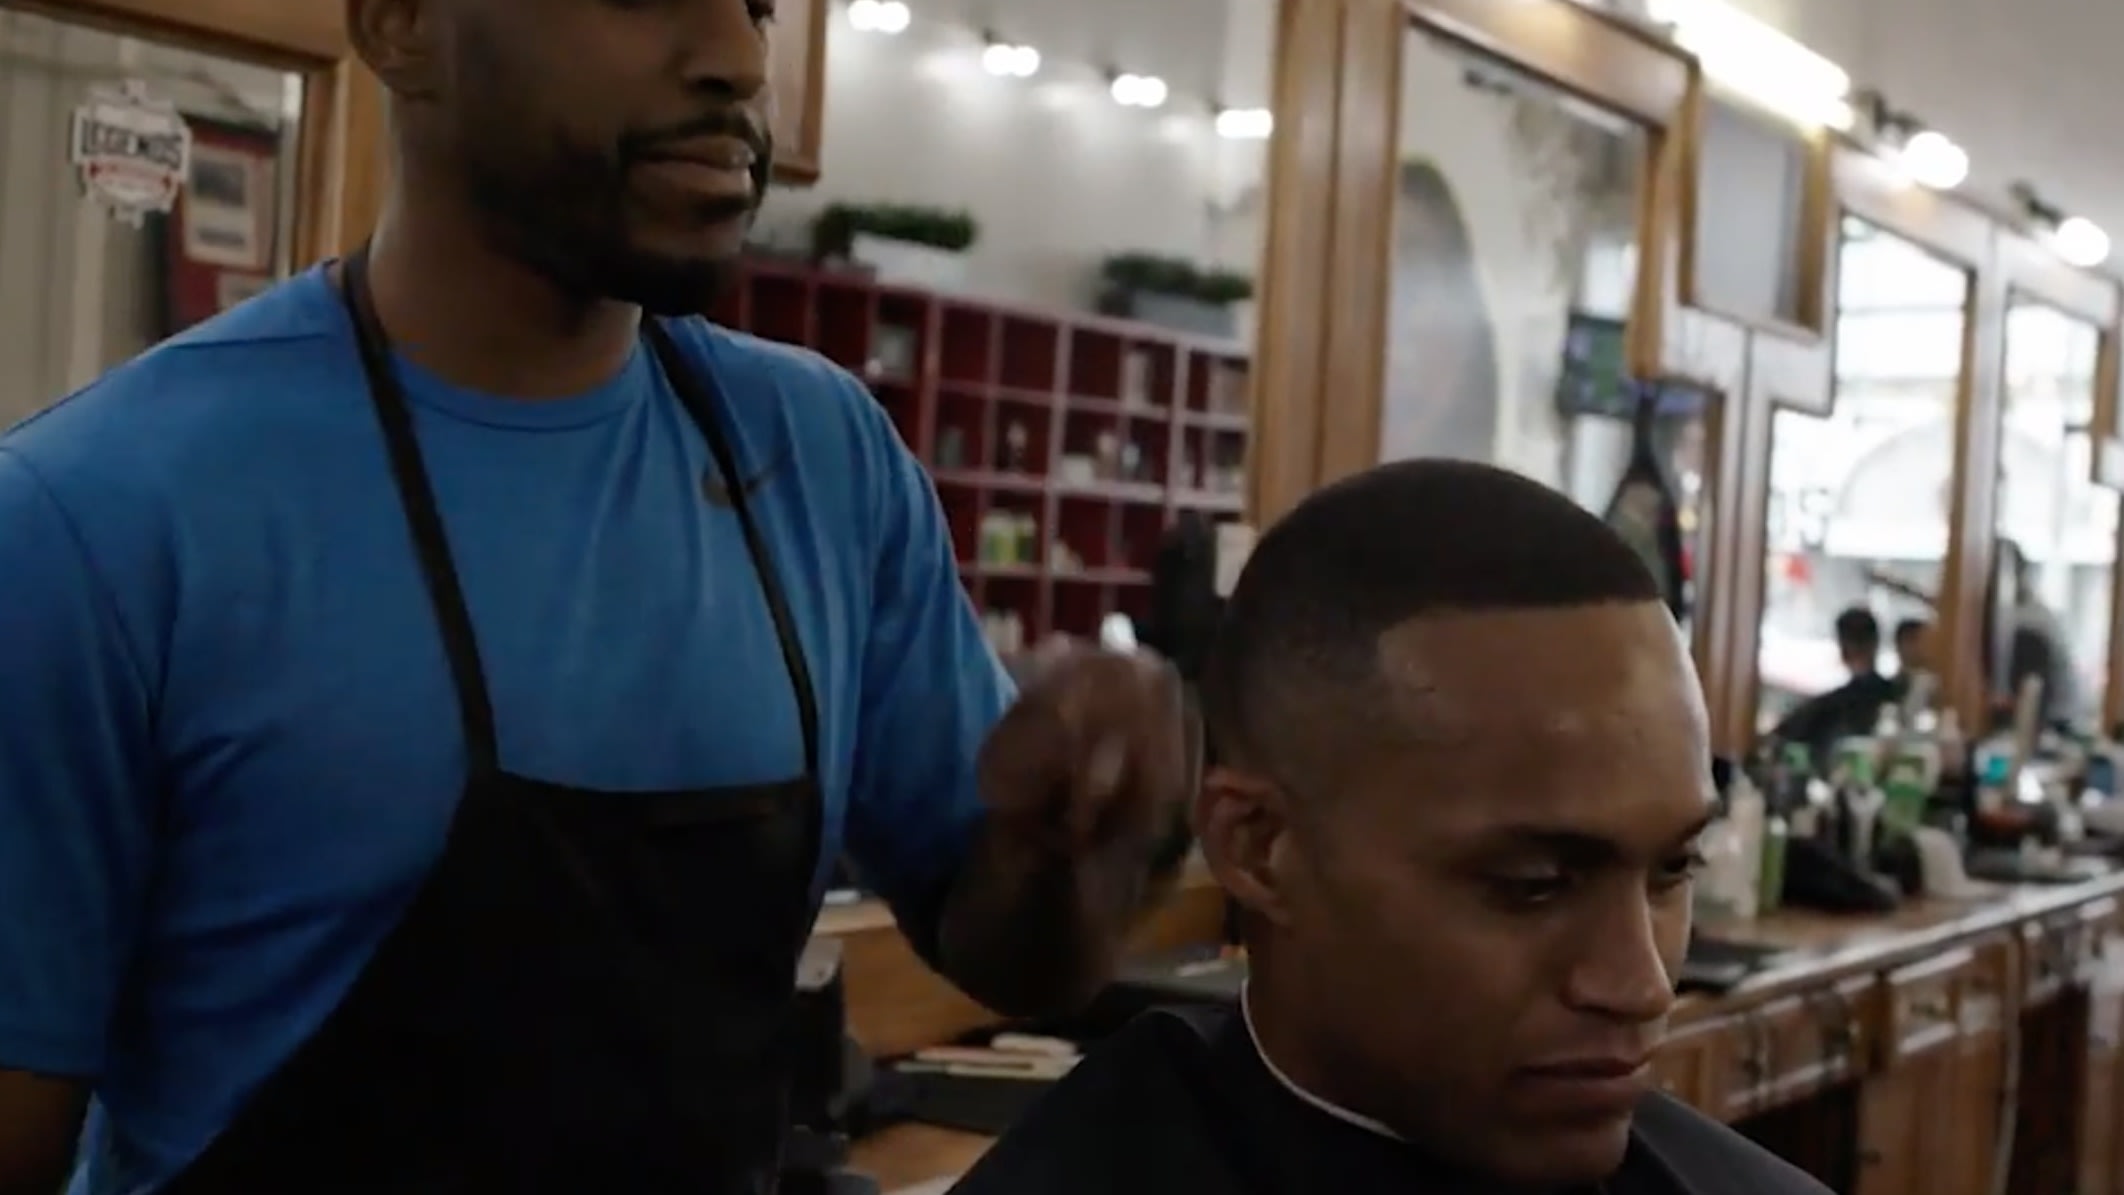 Man Awarded $80,000 After L.A. Barbershop Refused To Cut His Hair ...